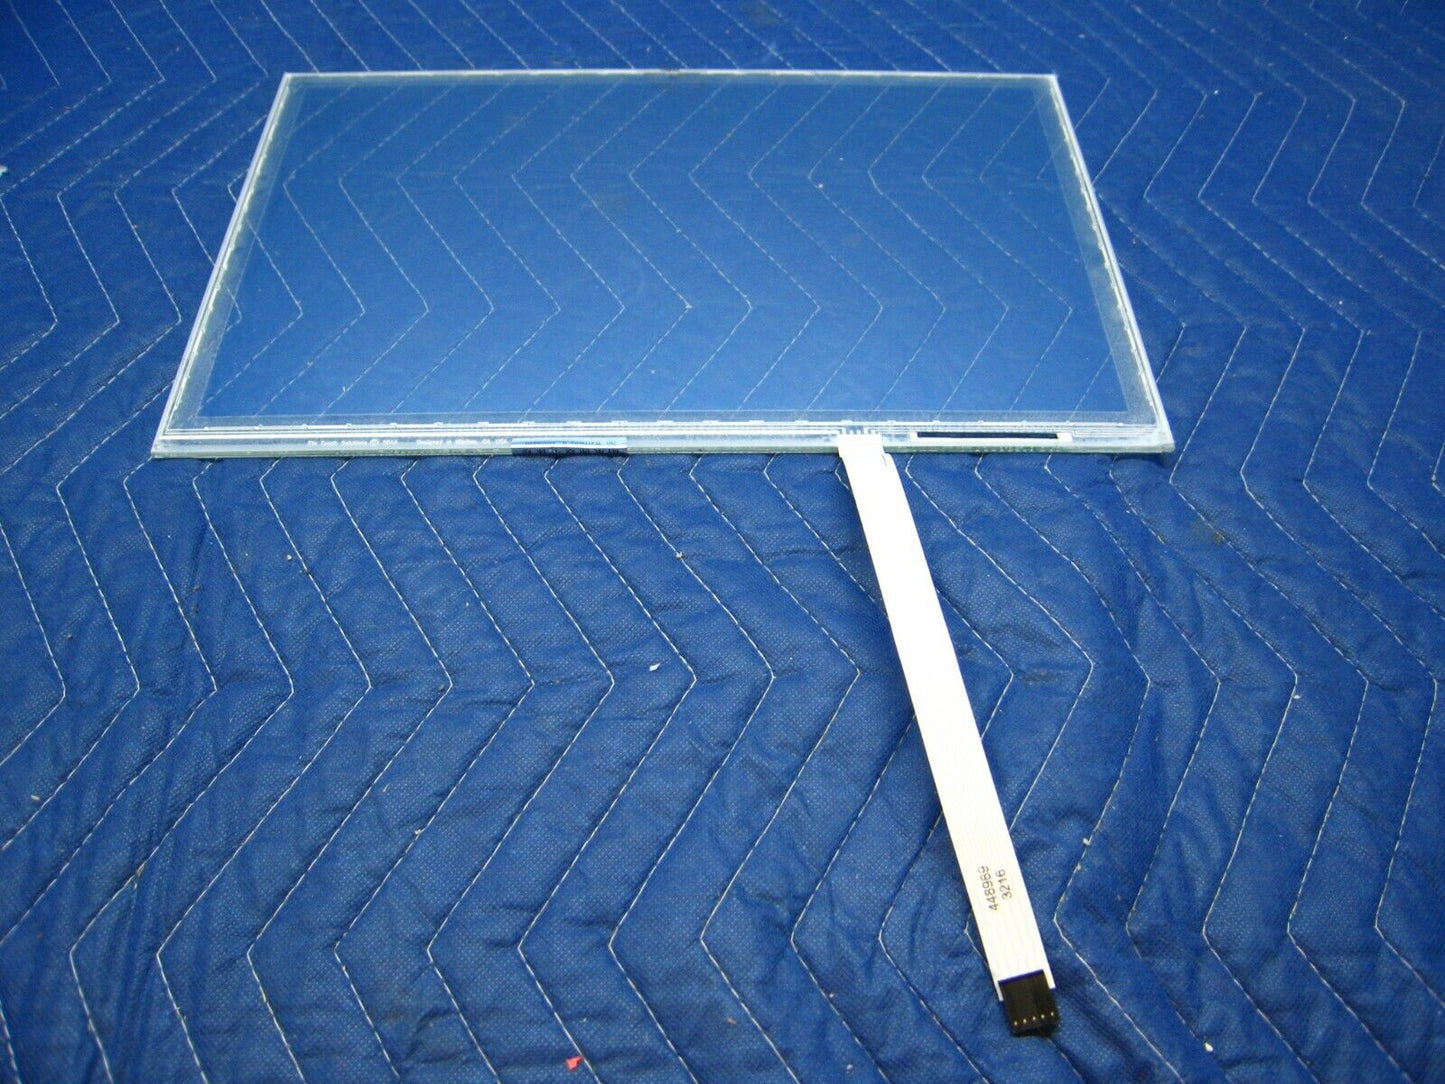 Touch Screen Glass Panel for Philips Intellivue MX700 Monitor